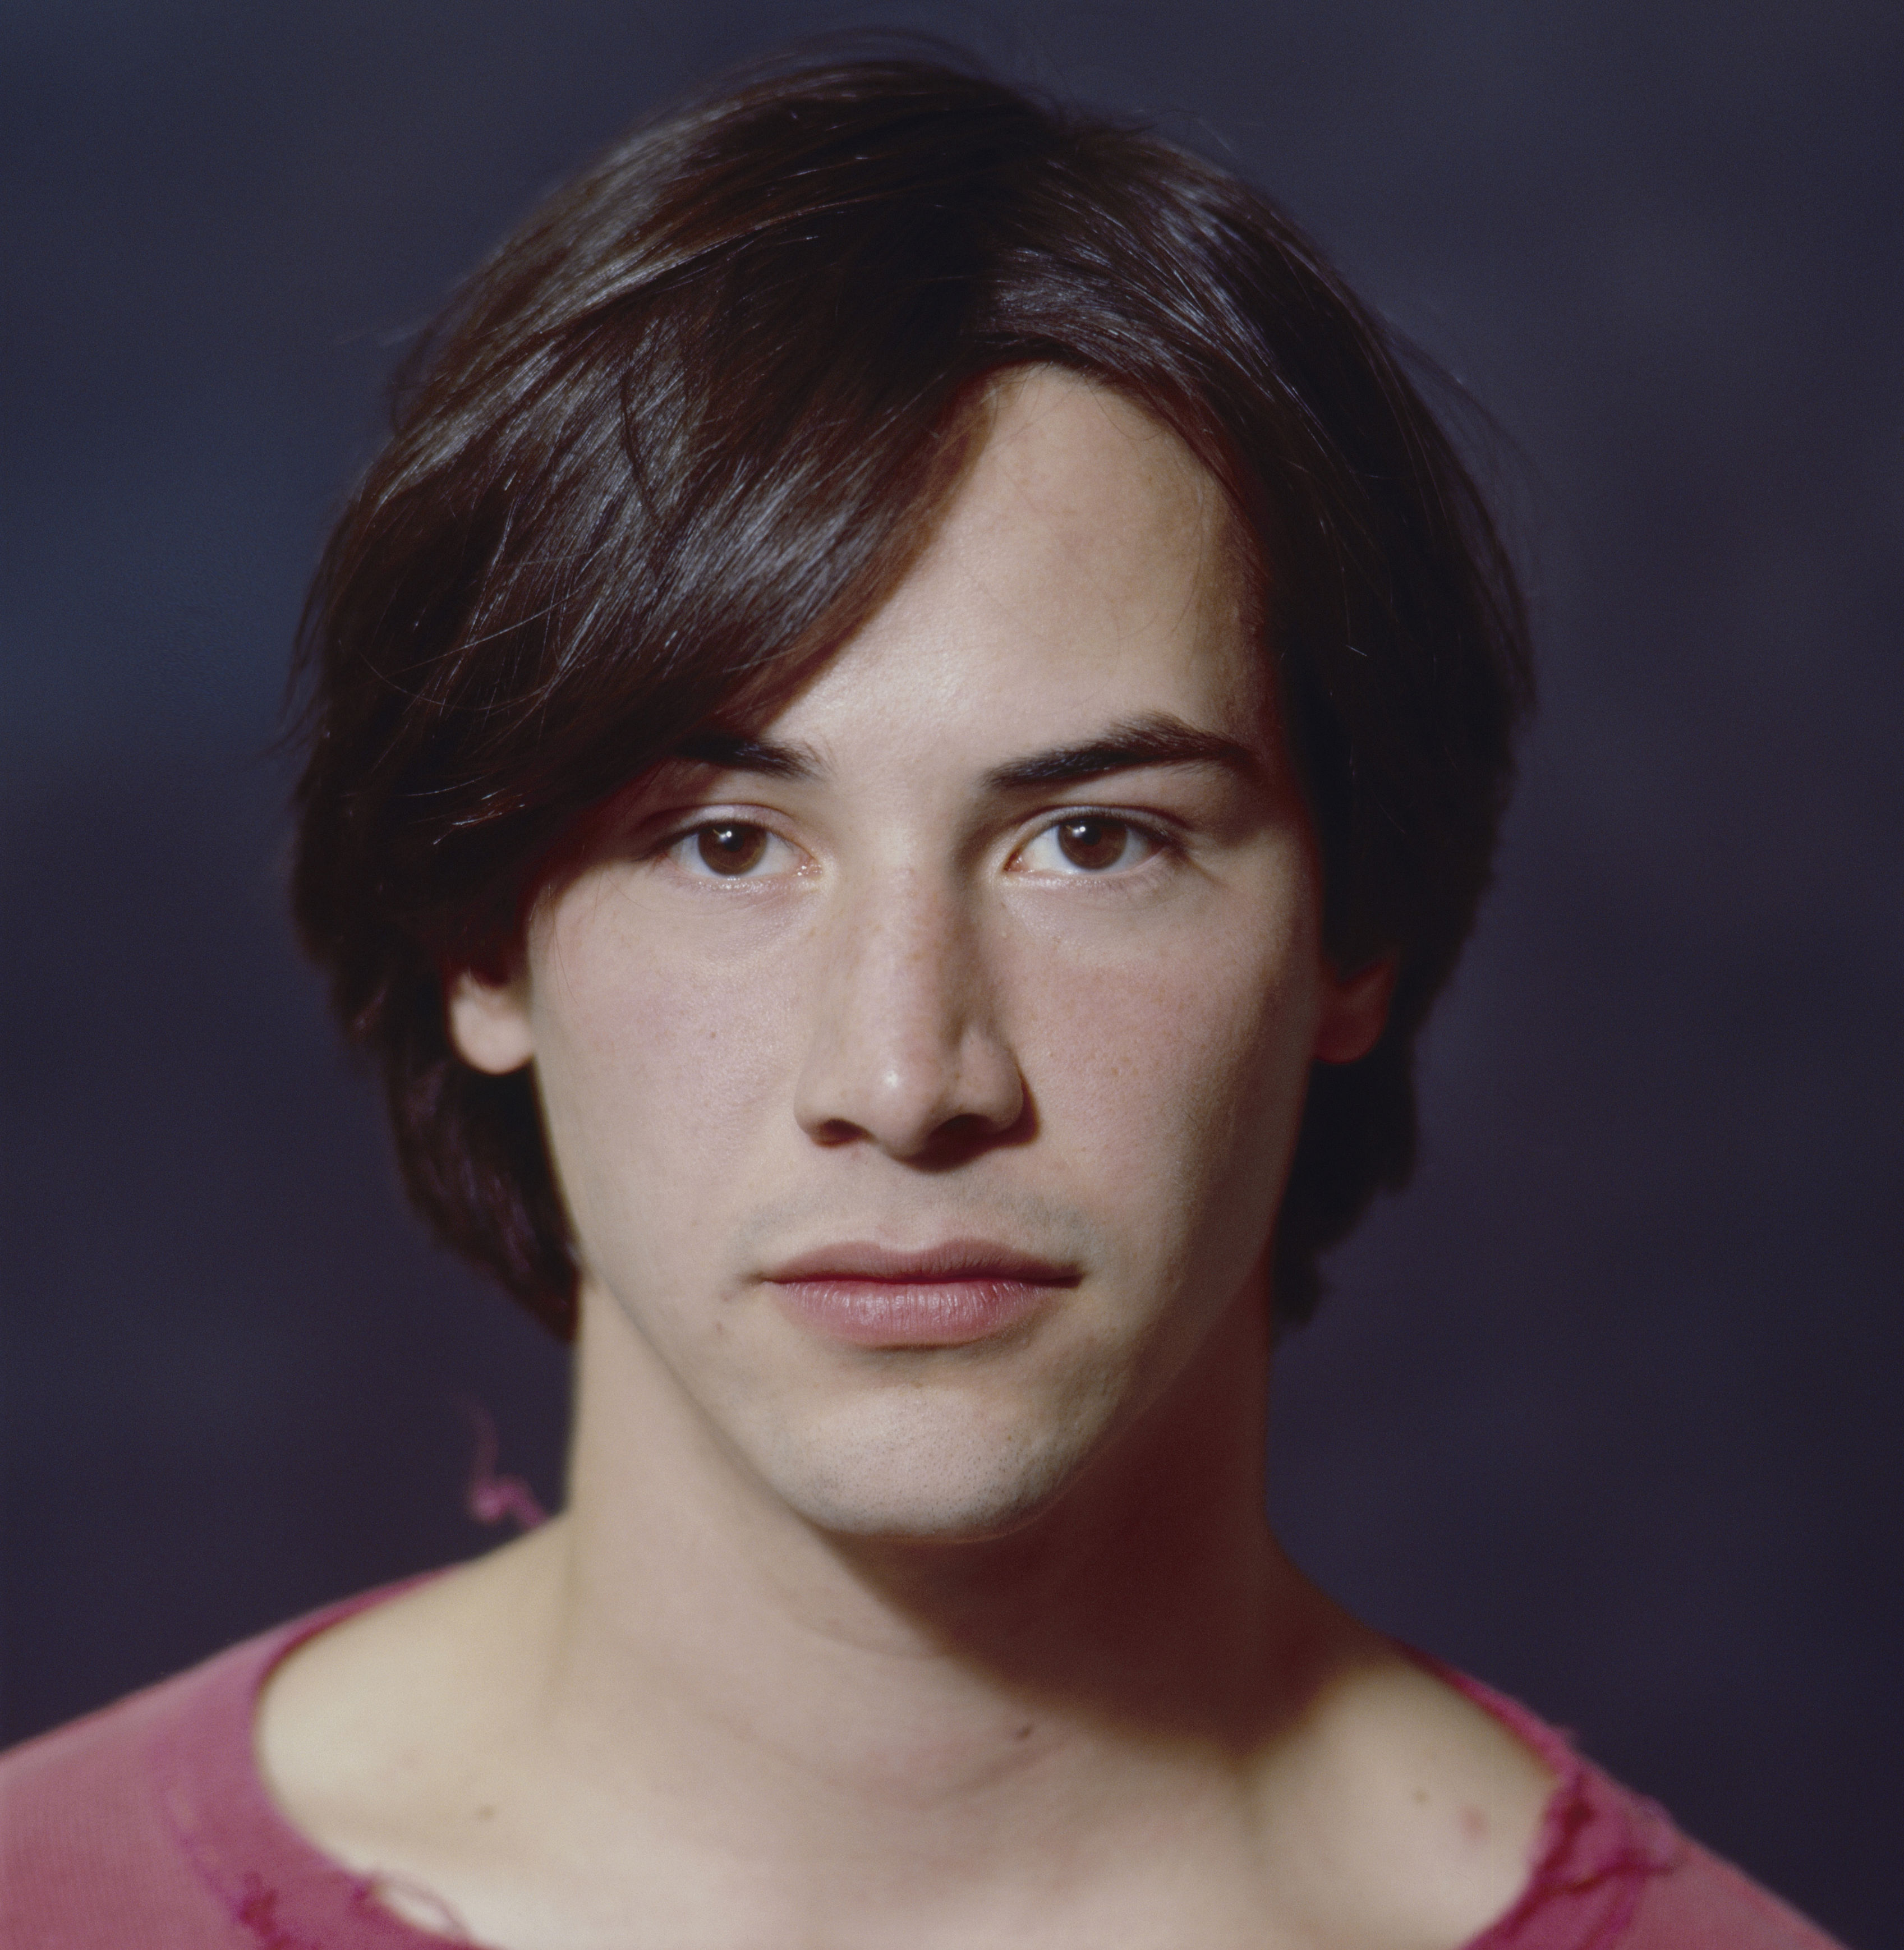 Keanu Reeves' life and career in photos